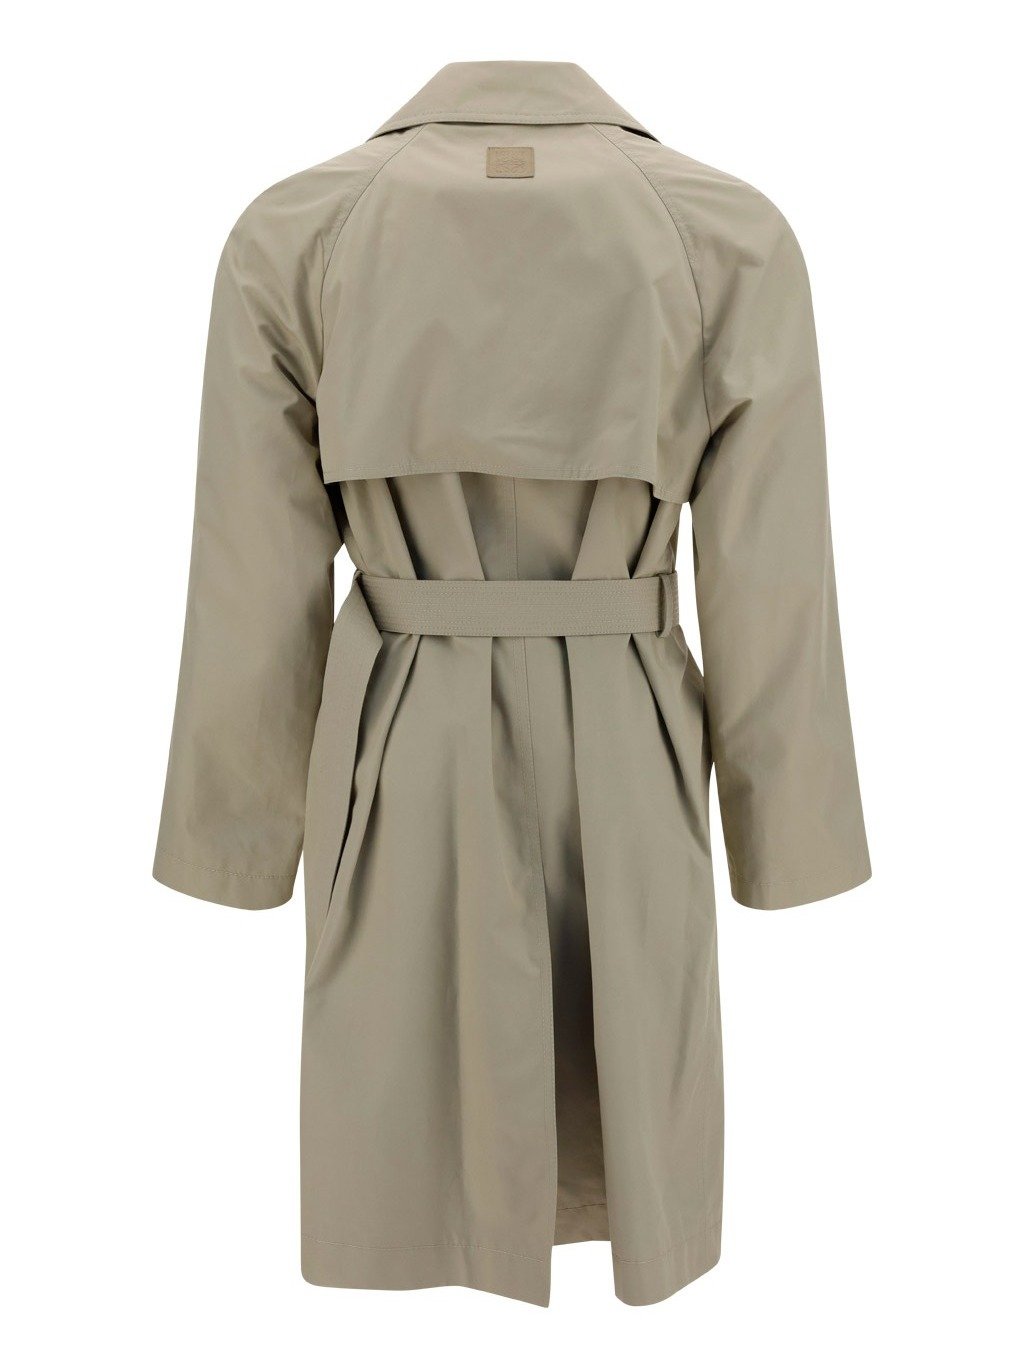 Loewe Double-Breasted Trench Coat